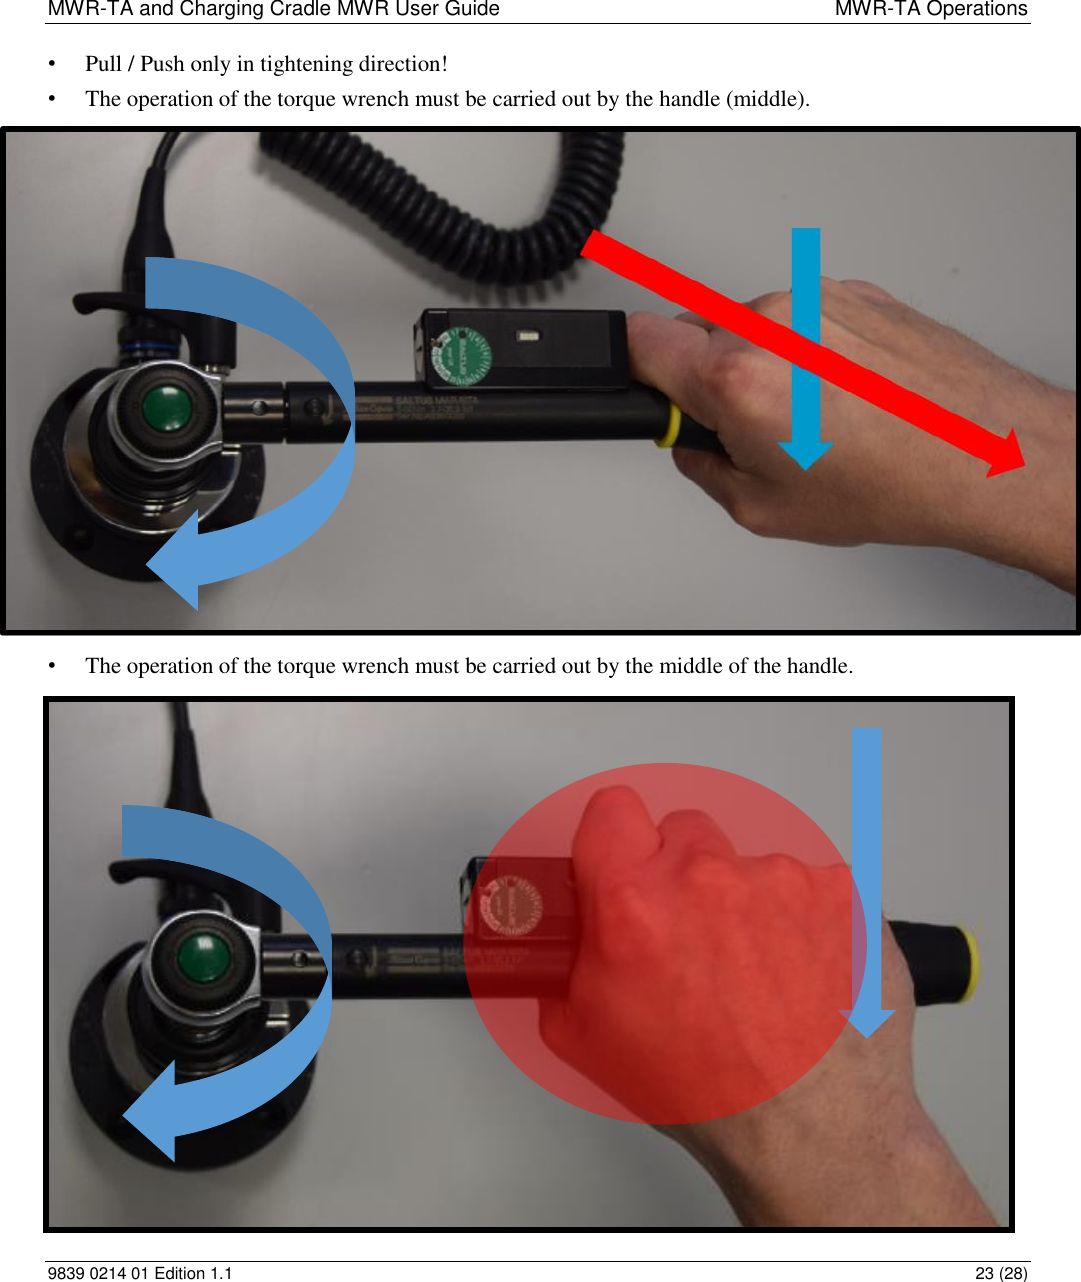 MWR-TA and Charging Cradle MWR User Guide  MWR-TA Operations 9839 0214 01 Edition 1.1  23 (28) • Pull / Push only in tightening direction! • The operation of the torque wrench must be carried out by the handle (middle). • The operation of the torque wrench must be carried out by the middle of the handle. 